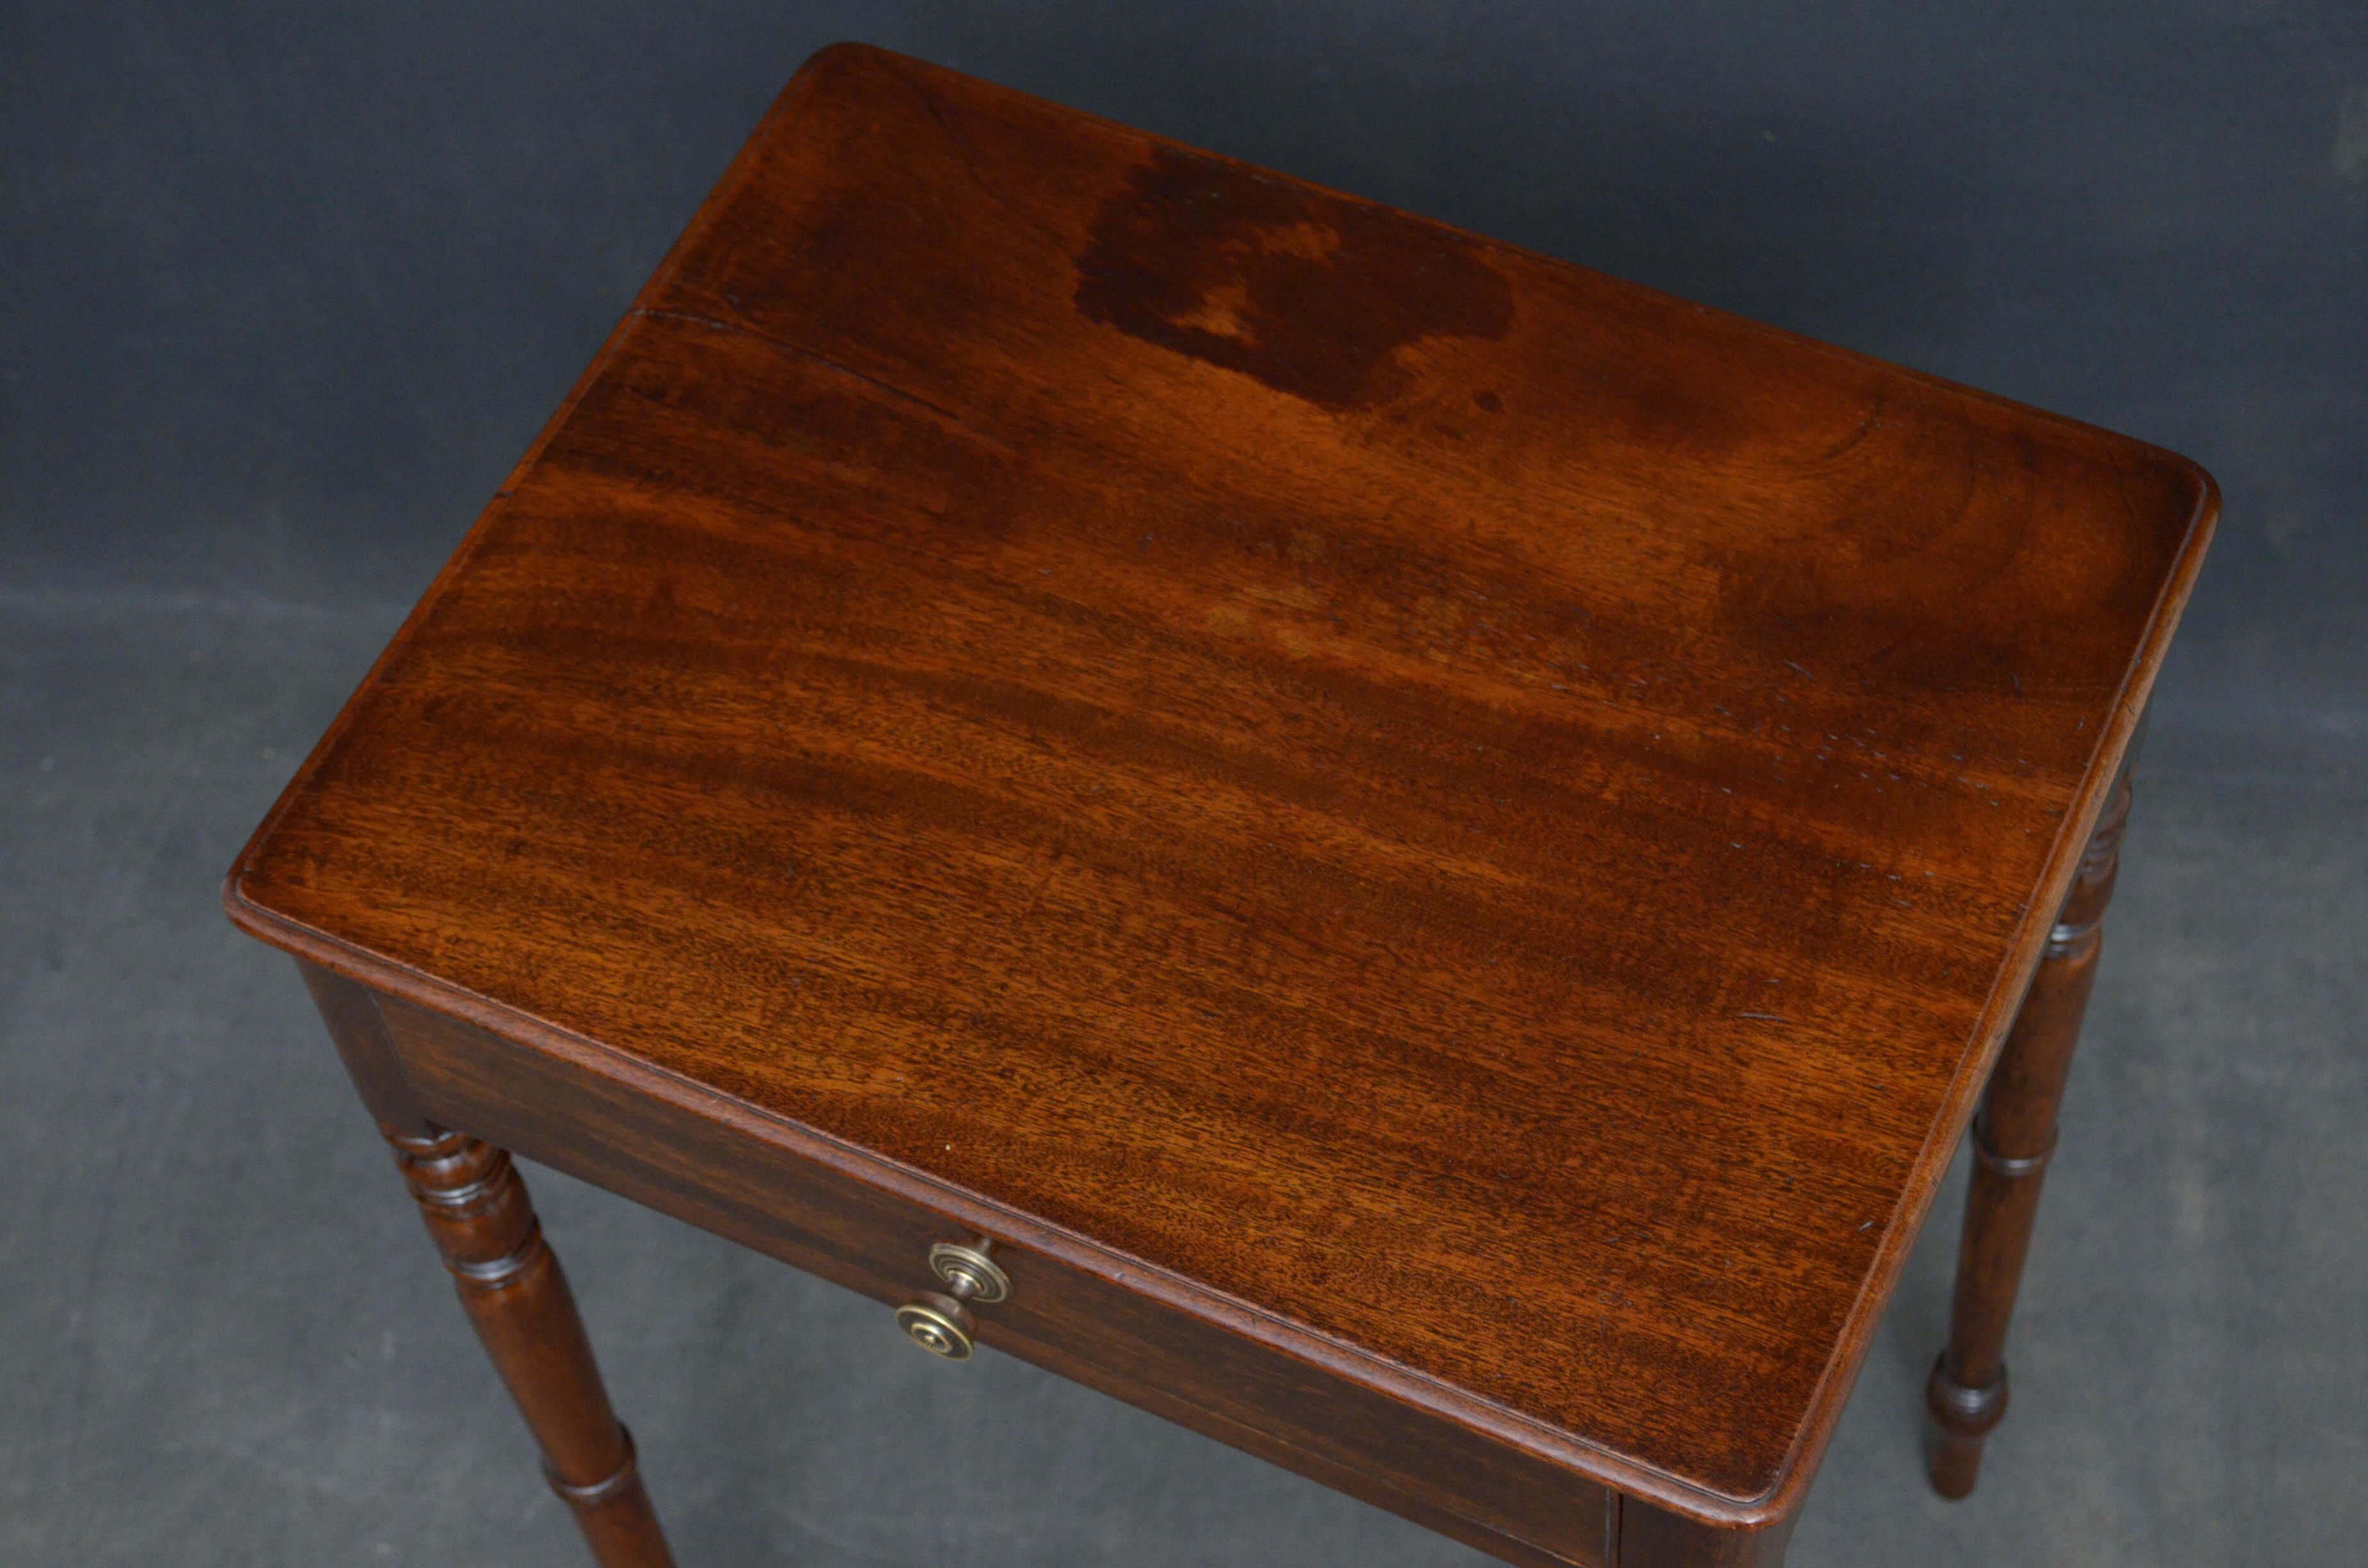 Sn4457, George IV table of simple and restrain design with single piece mahogany top, frieze drawer and slender, turned and ringed legs. This antique table retains its original finish which has been cleaned and revived, circa 1830
Measures: H 28